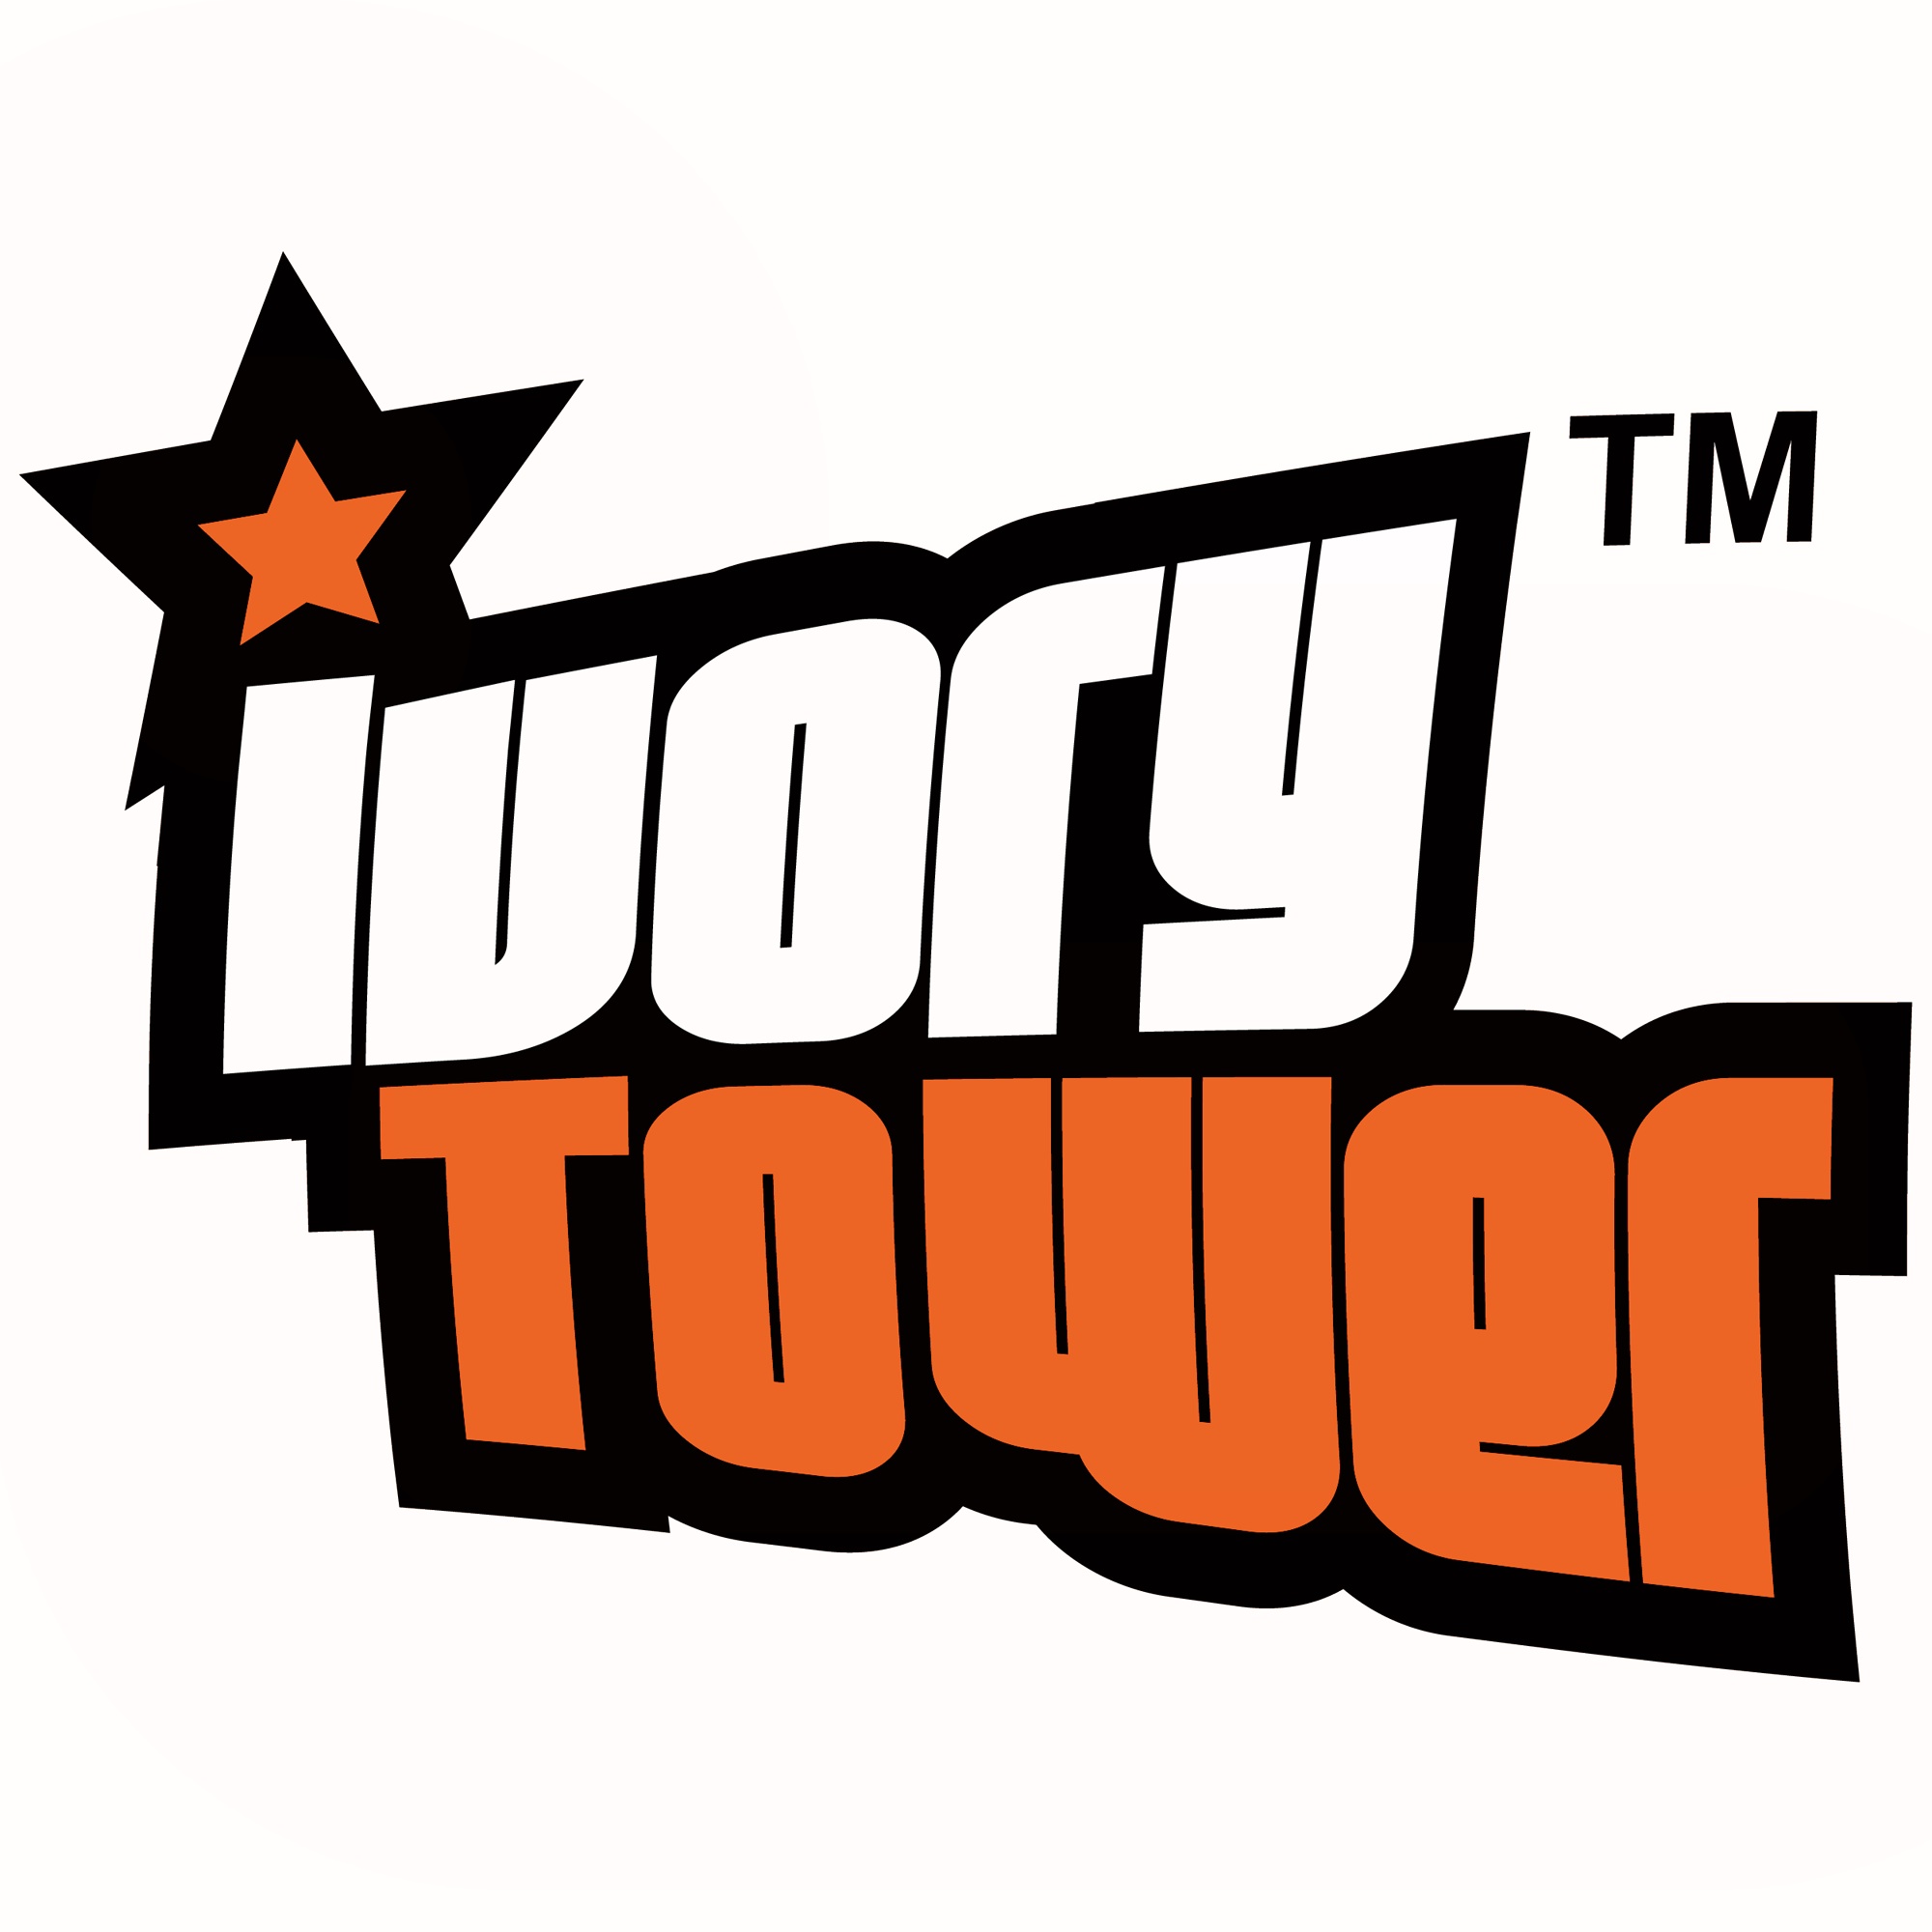 first logo of the development studio Ivory Tower